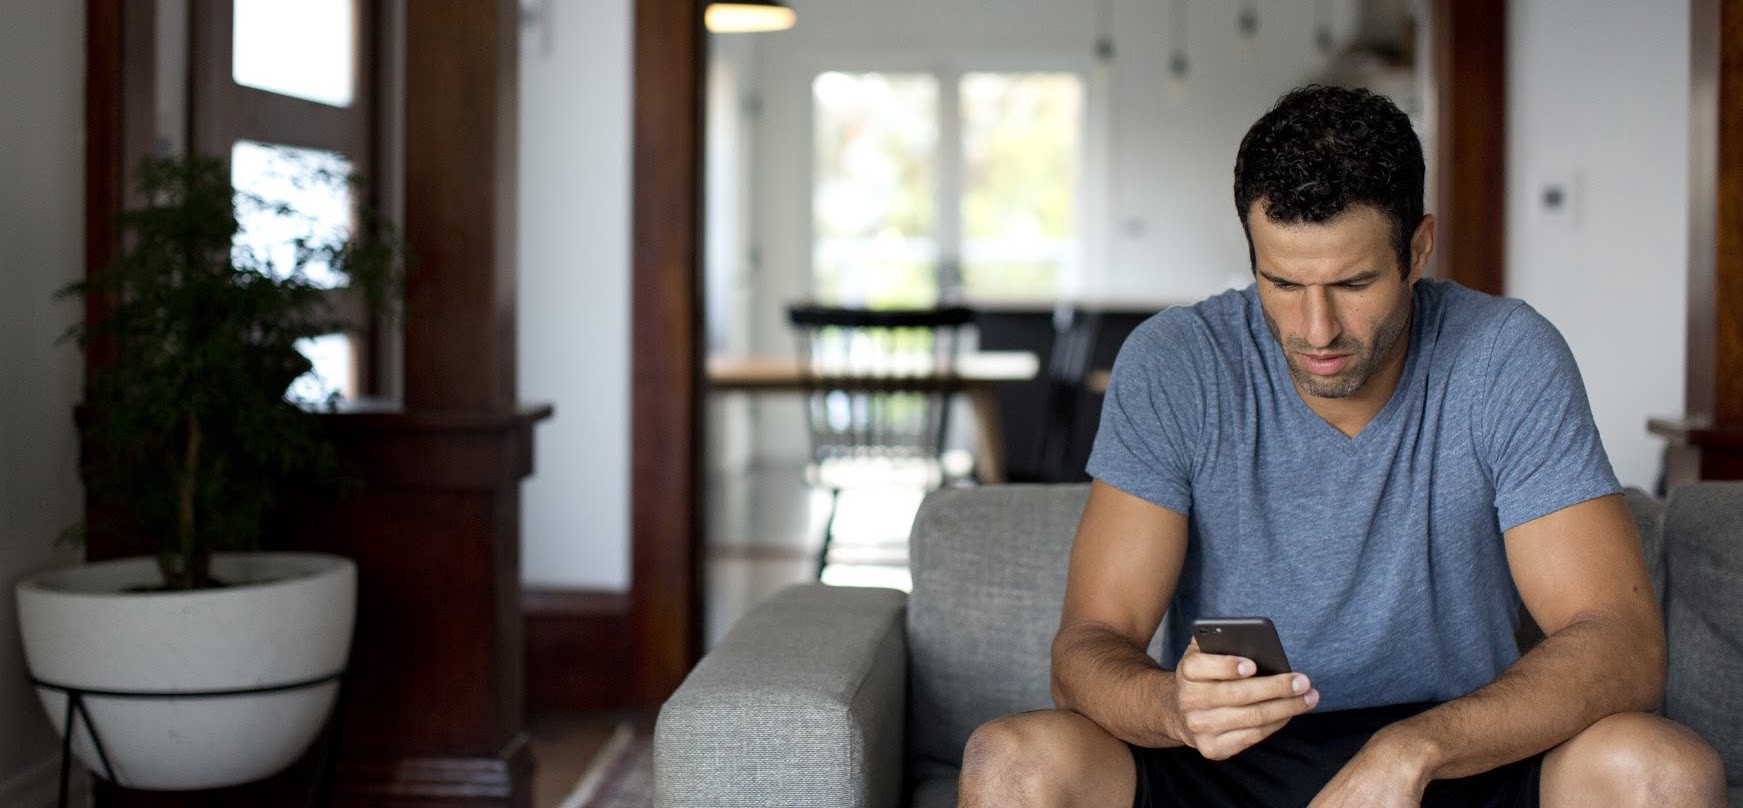 man looks at phone while sitting on couch